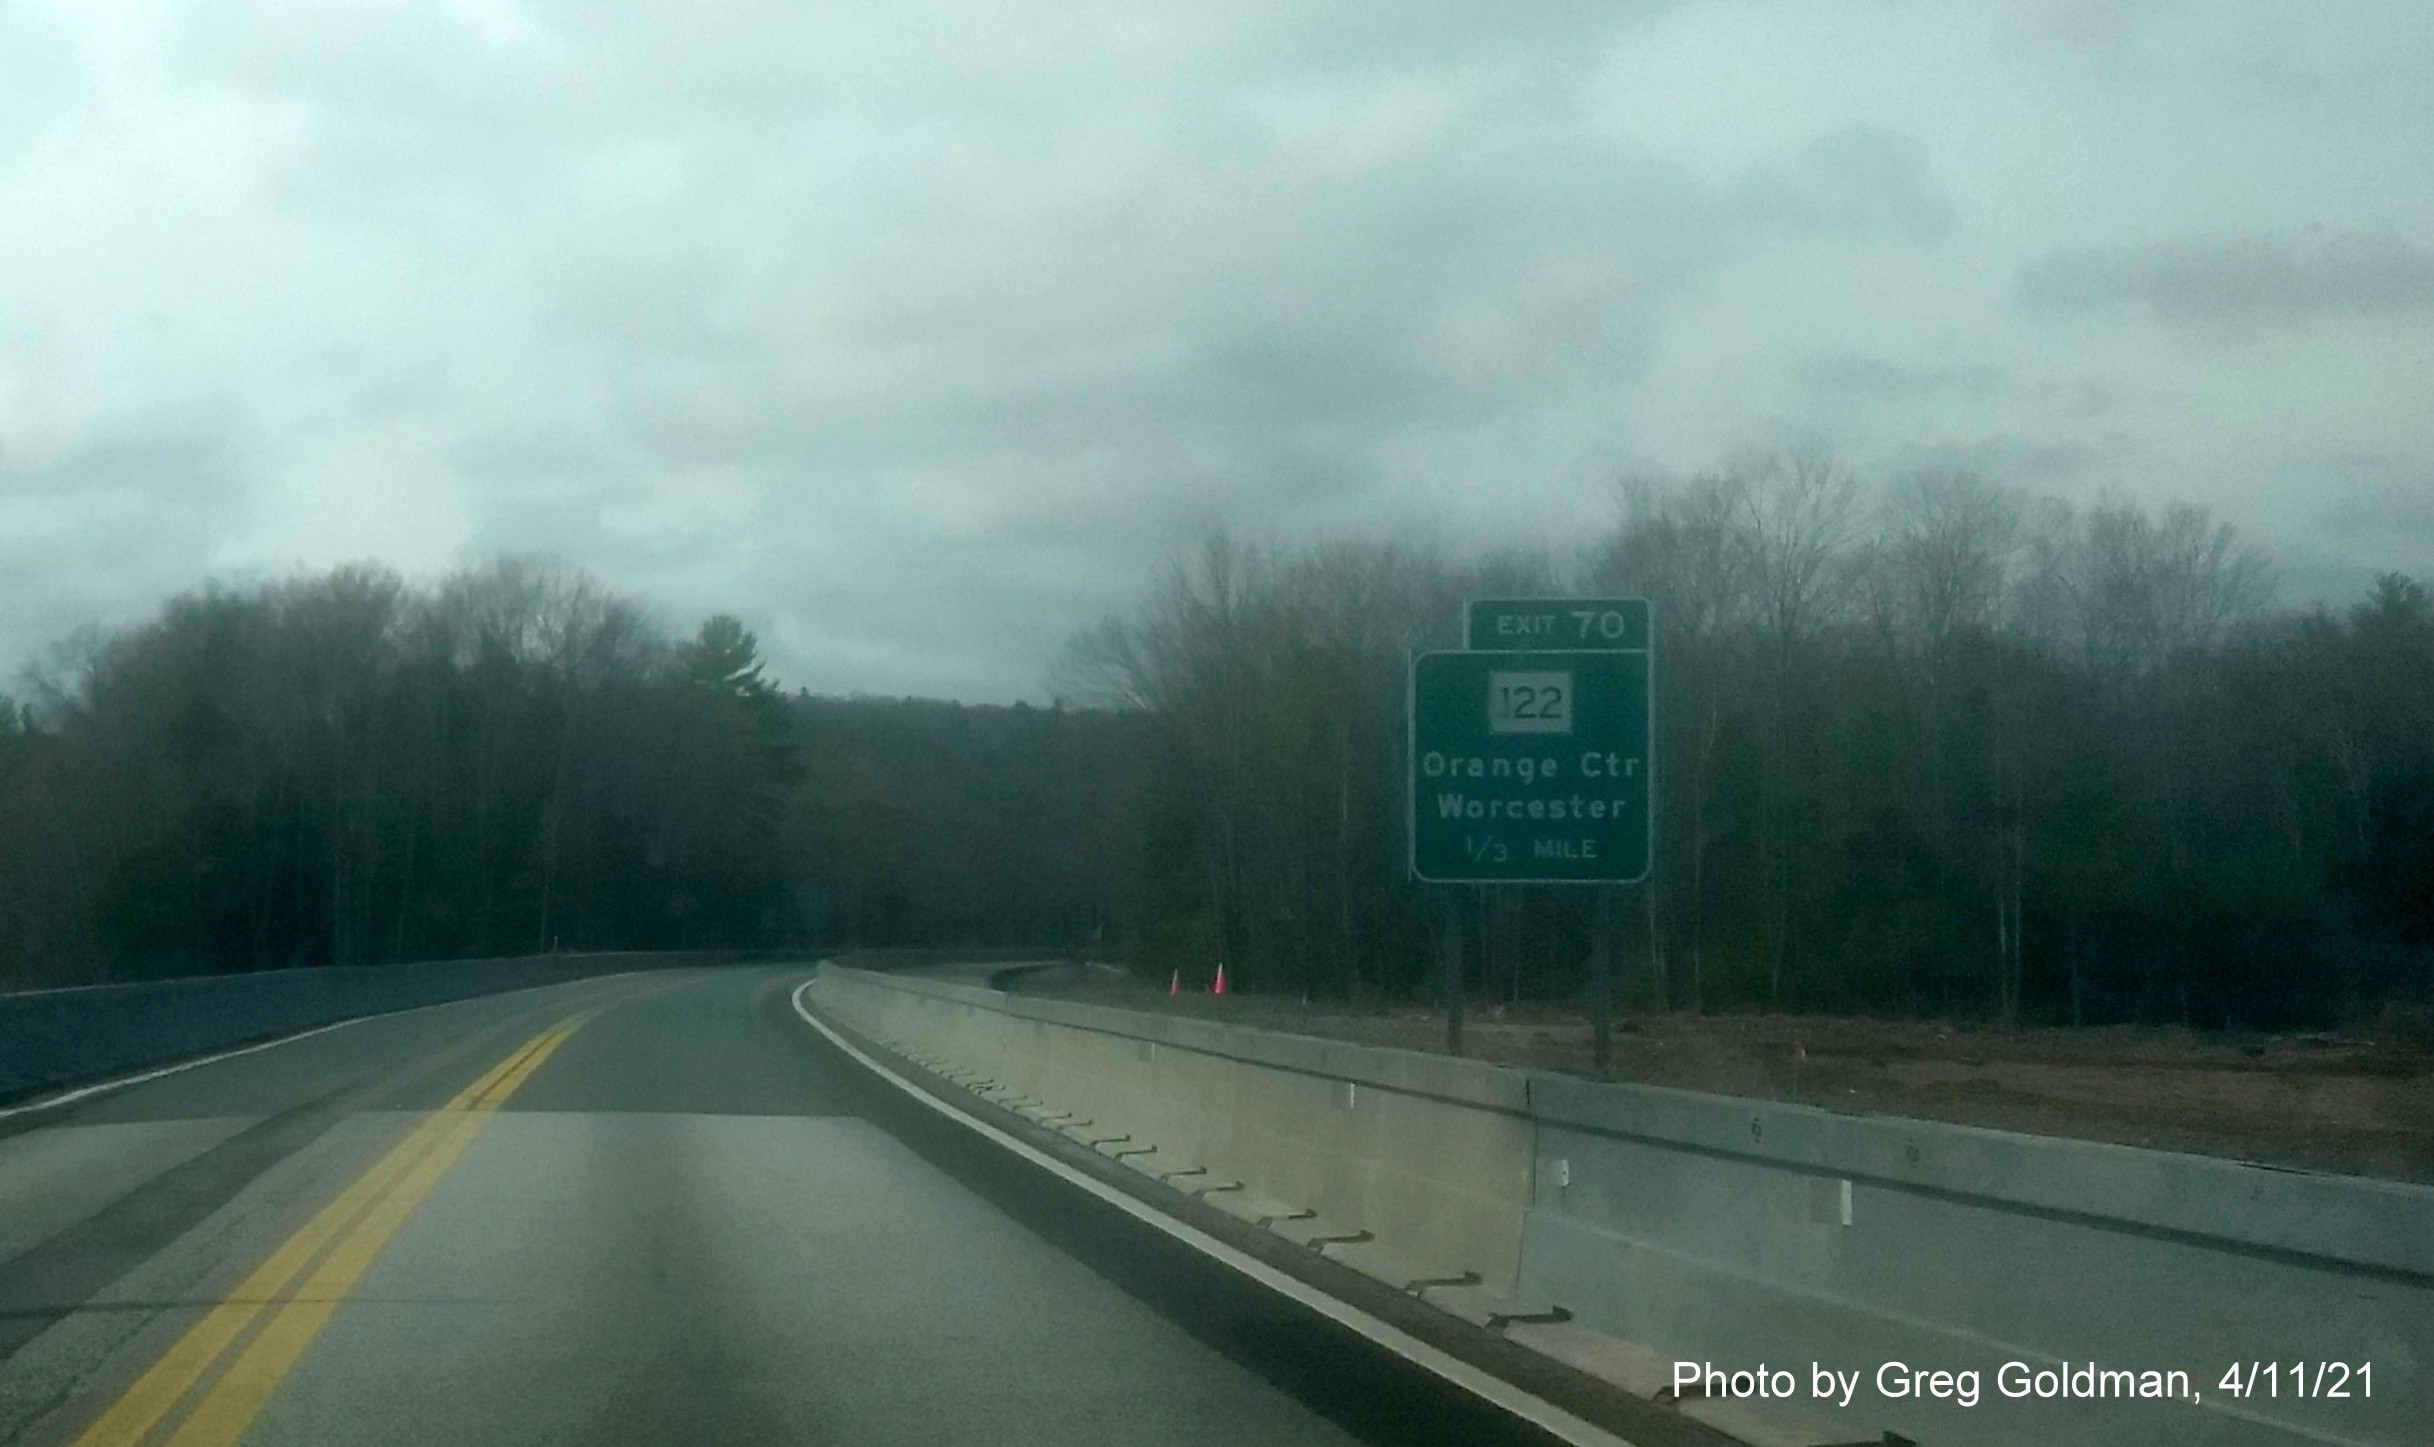 Image of 1/2 Mile advance sign for MA 122 exit with new milepost based exit number on MA 2 West in Orange, by Greg Goldman, April 2021